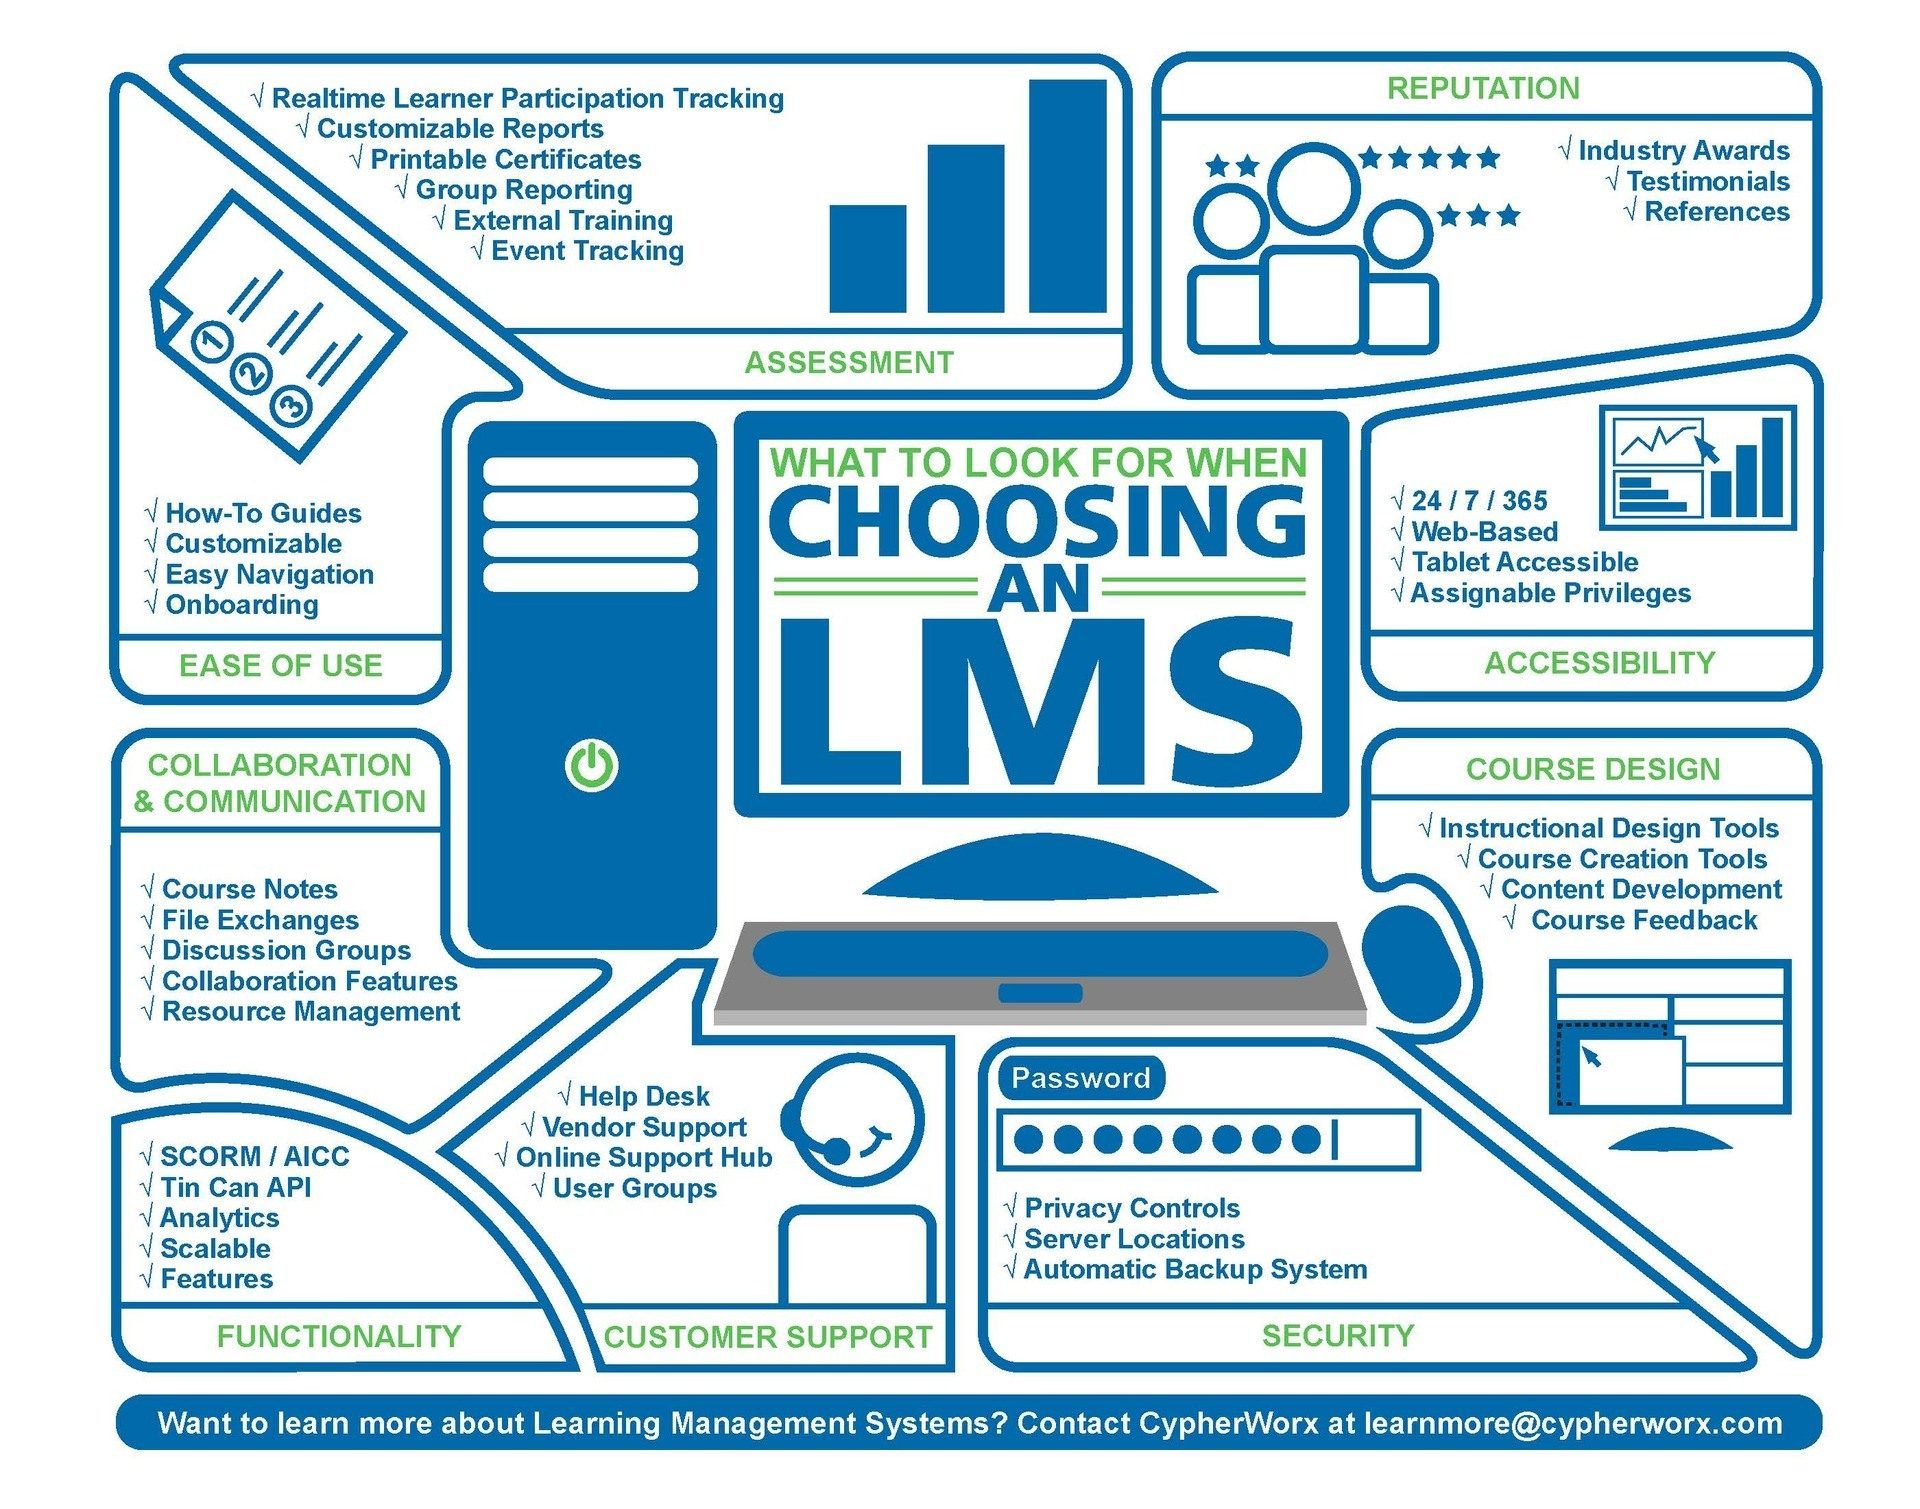 What To Look For When Choosing an LMS Infographic